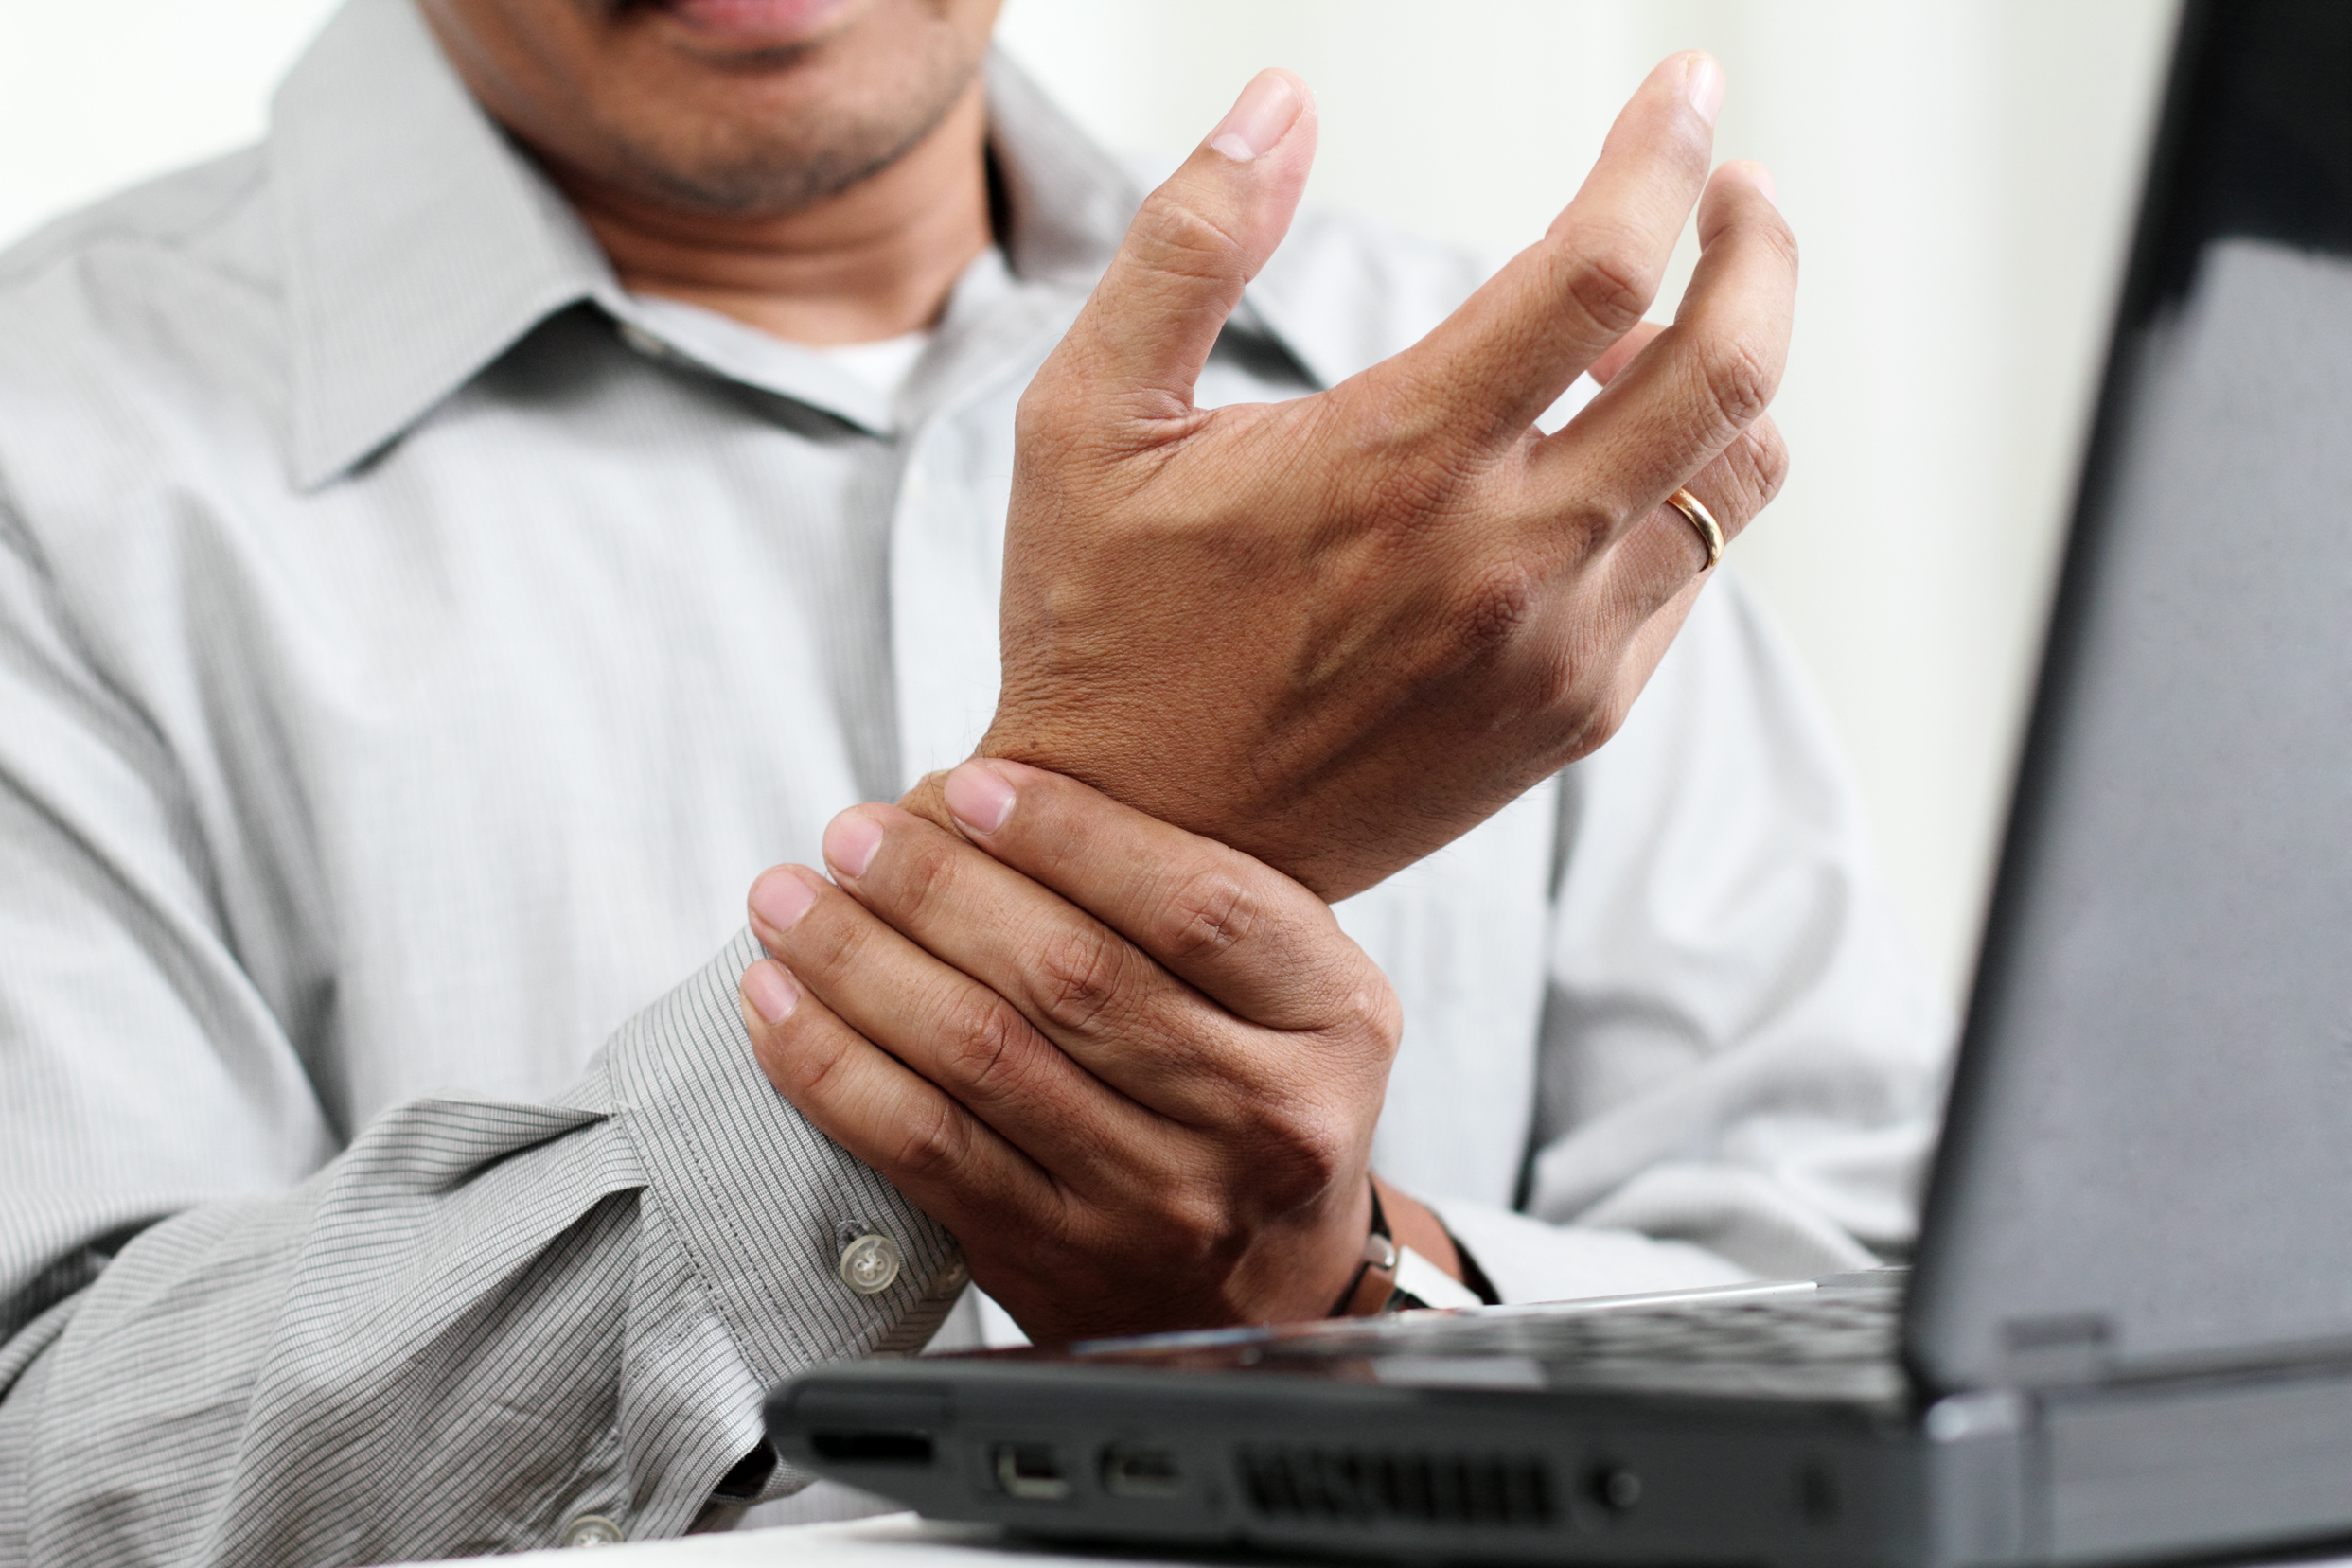 carpal tunnel pain in grand rapids, mi with a local chiropractor